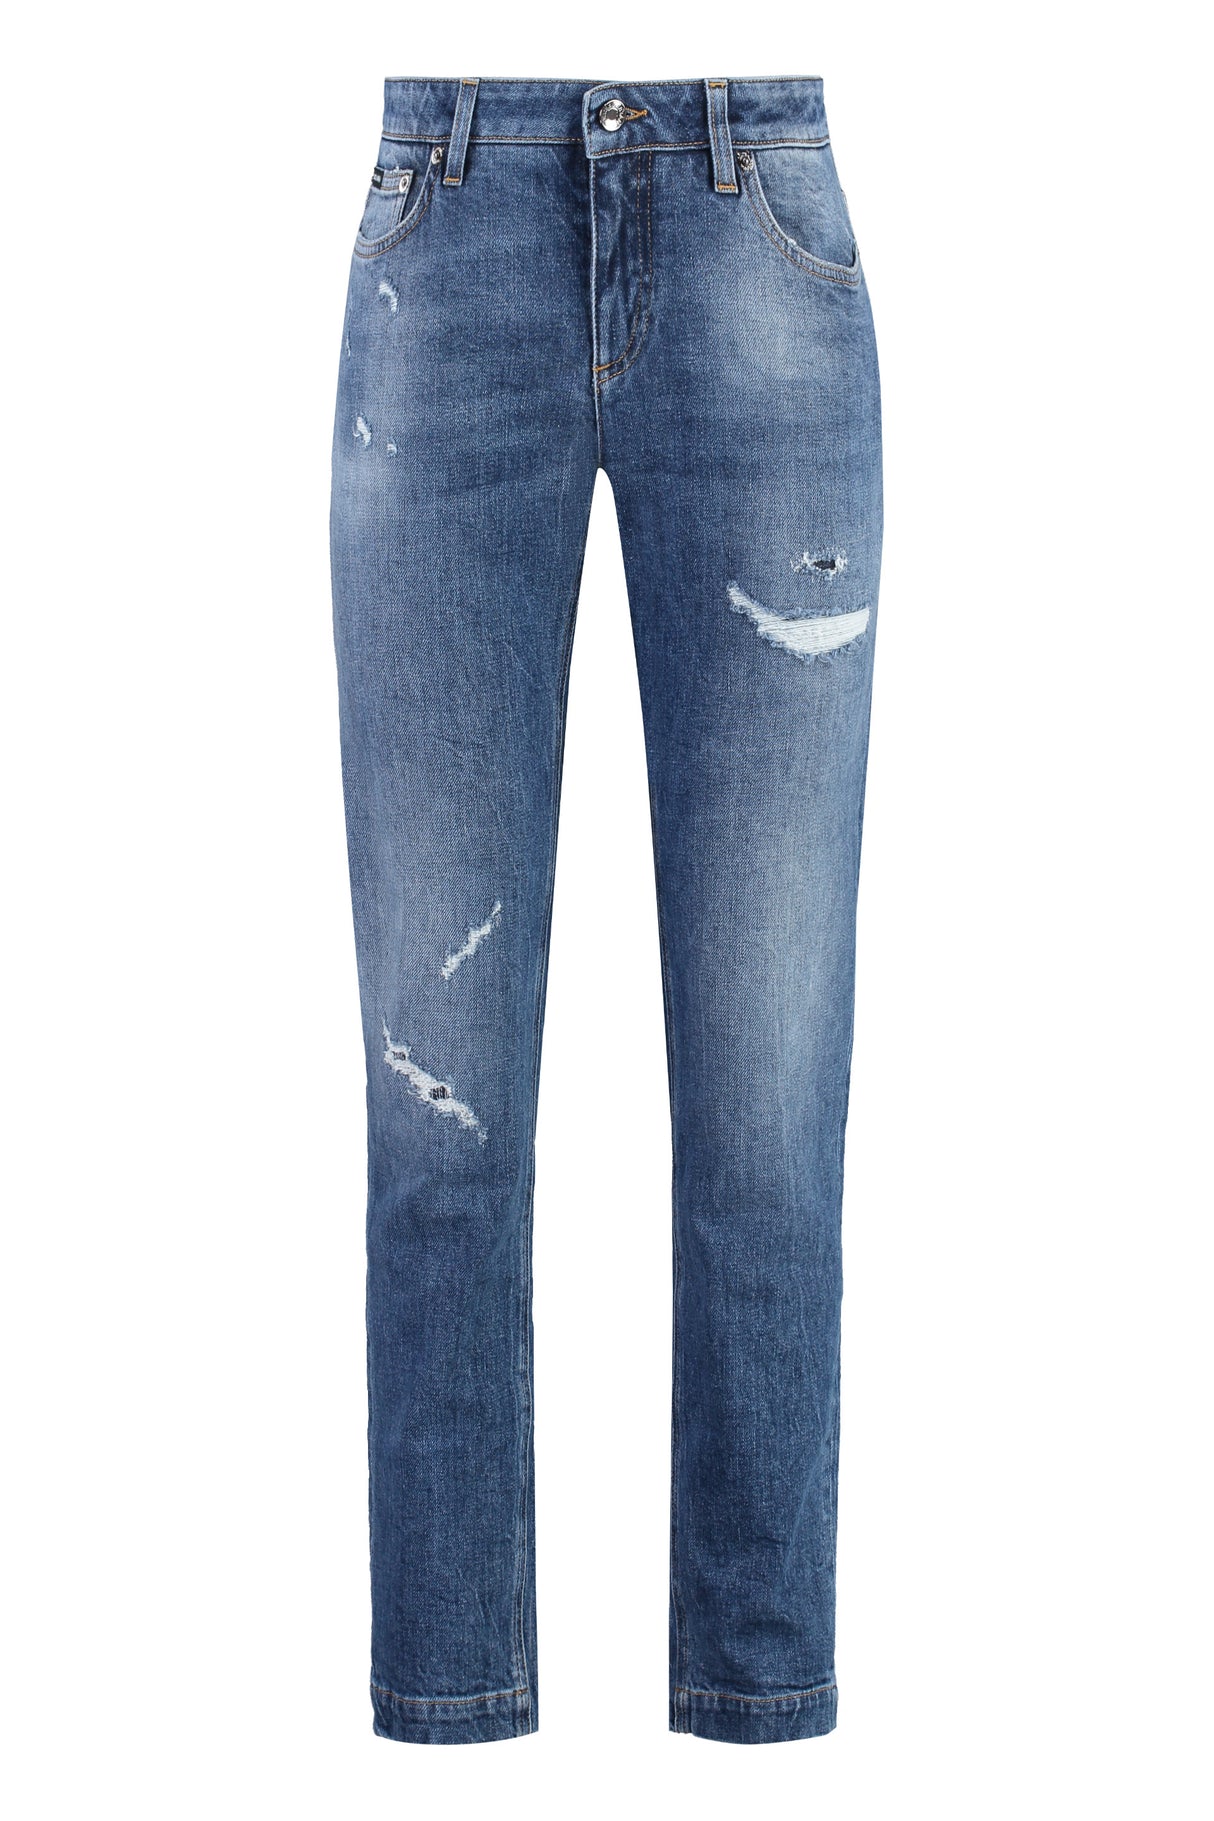 DOLCE & GABBANA Stretchy Denim Jeans for Women with Distressed Details and Metal Rivets and Buttons